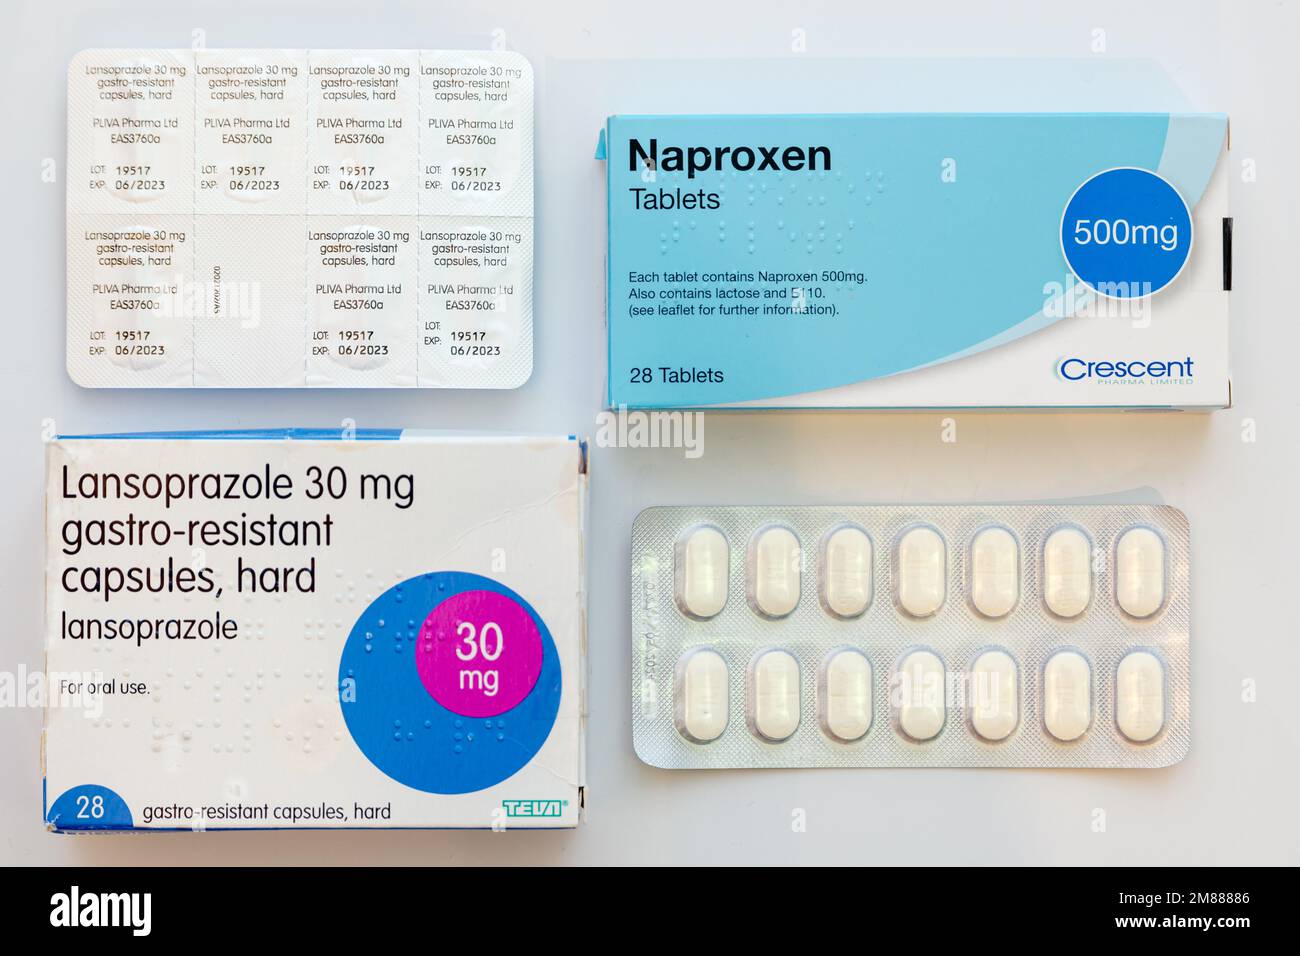 Box and blister pack of generic 500mg Naproxen tablets and 30mg Lansoprazole capsules, often prescribed together Stock Photo